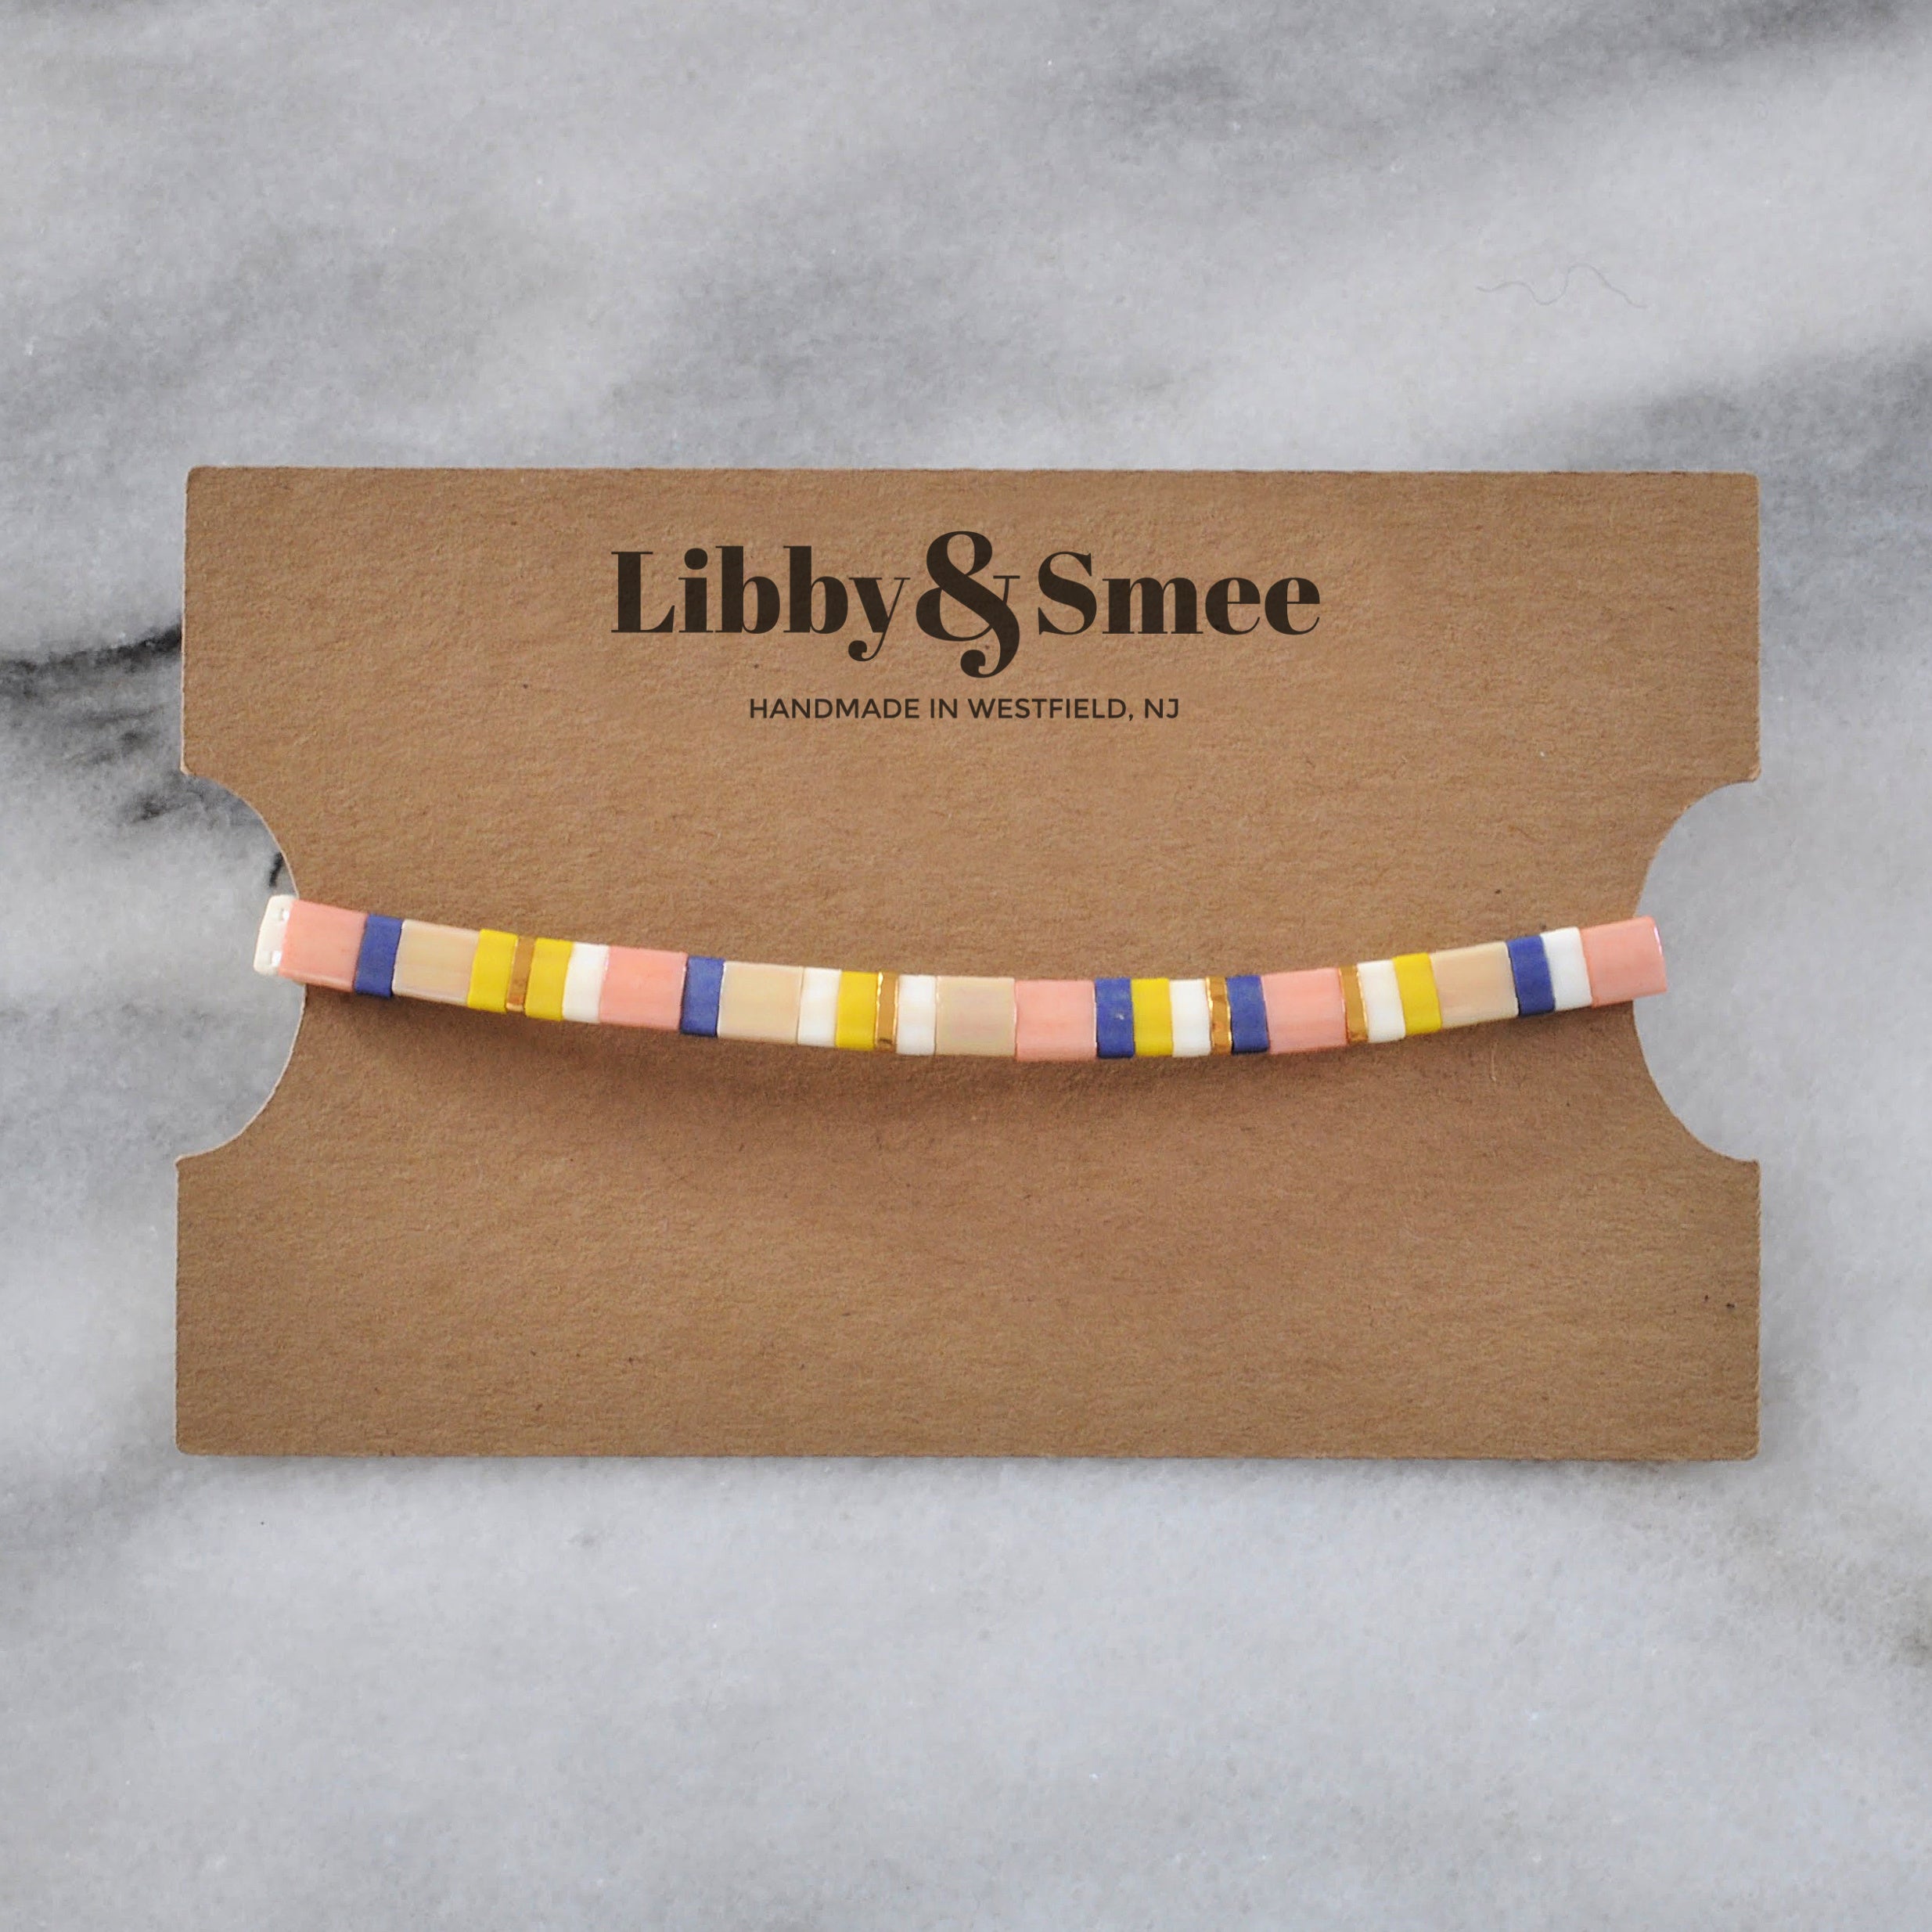 Libby & Smee stretch tile bracelet in The Classic